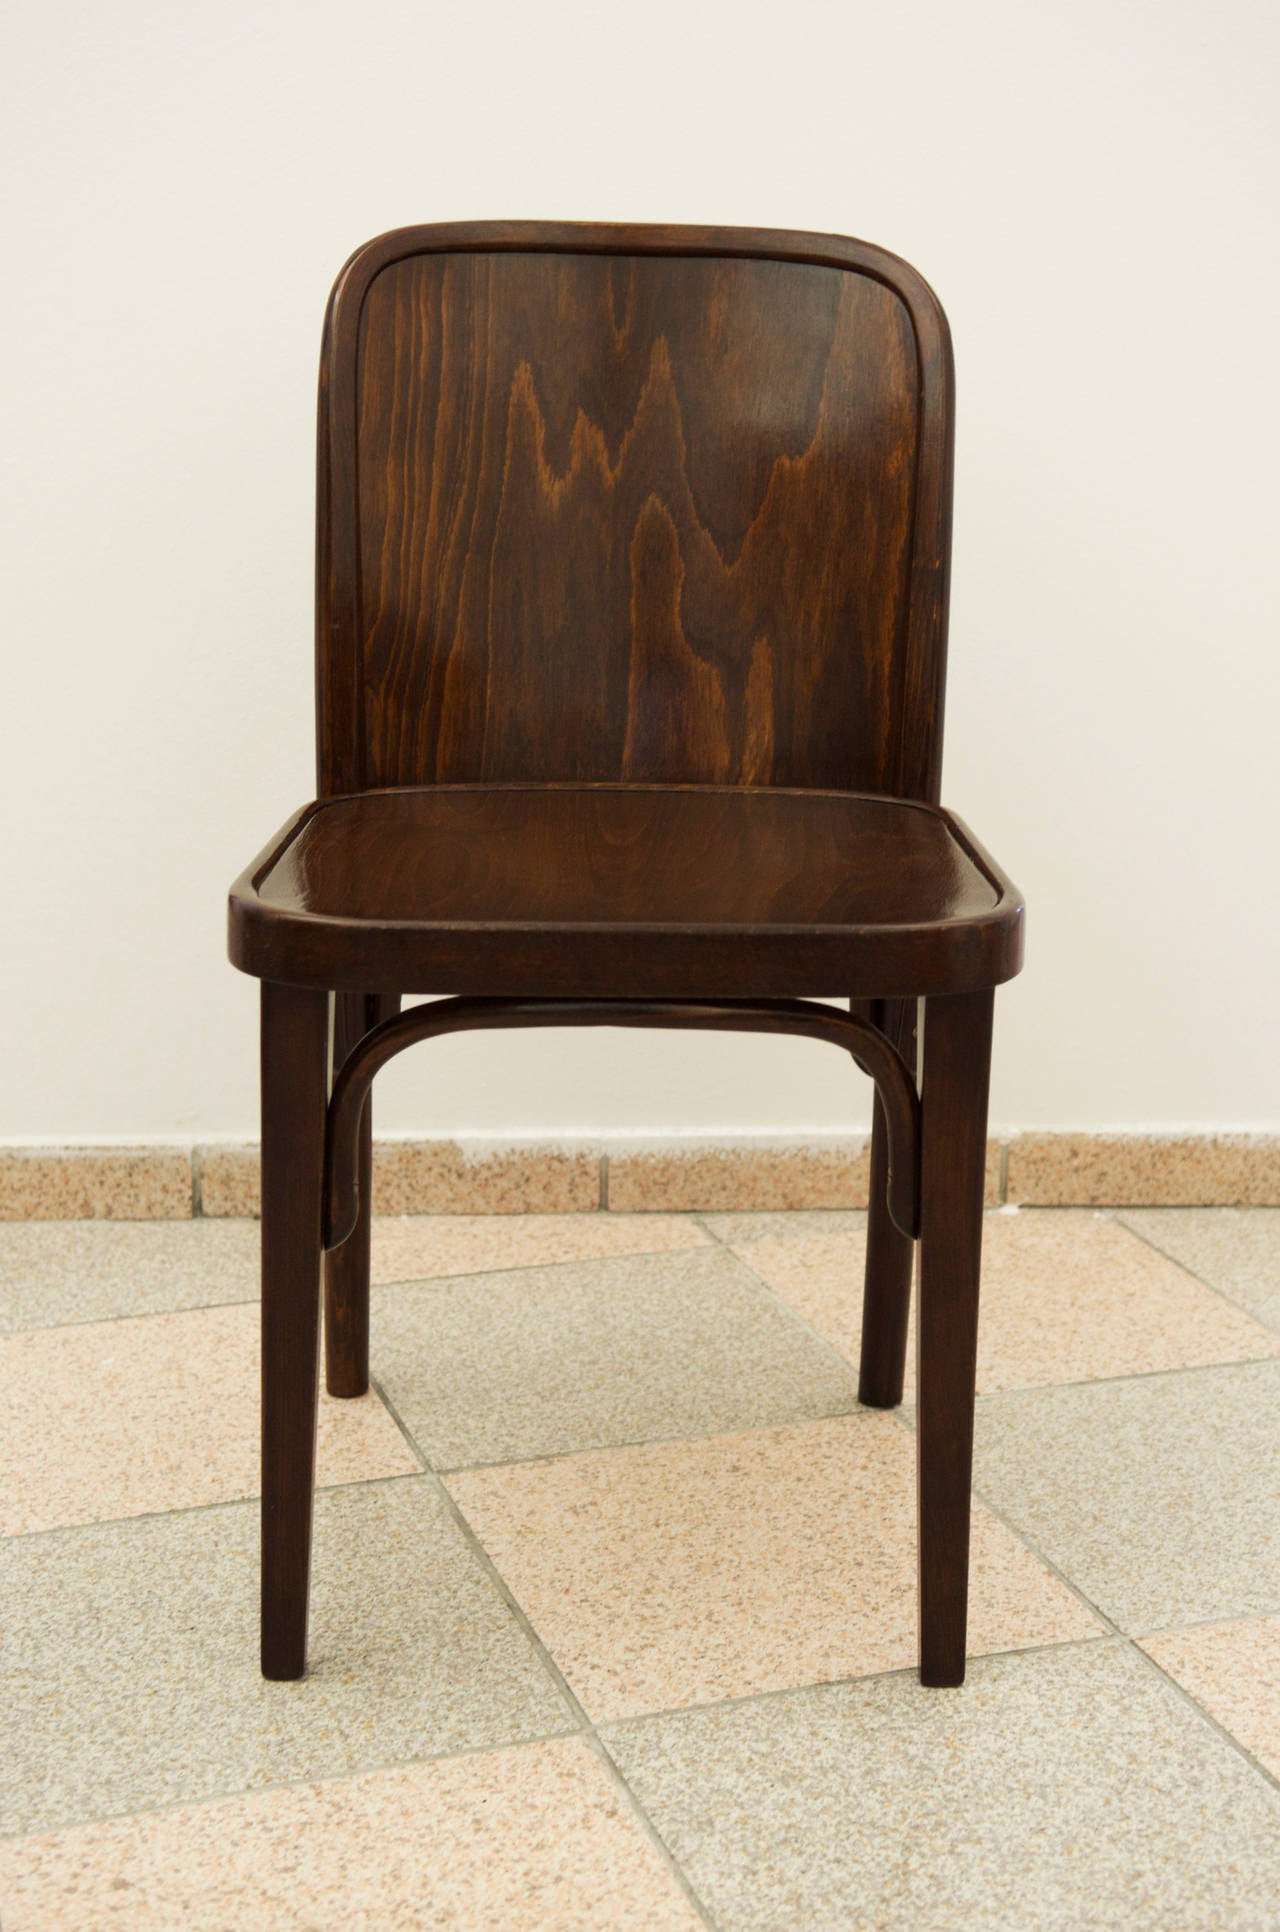 Thonet no. 811 chairs attributed to Josef Hoffmann
fully restored, dark stained, shellack polish.
price per chair